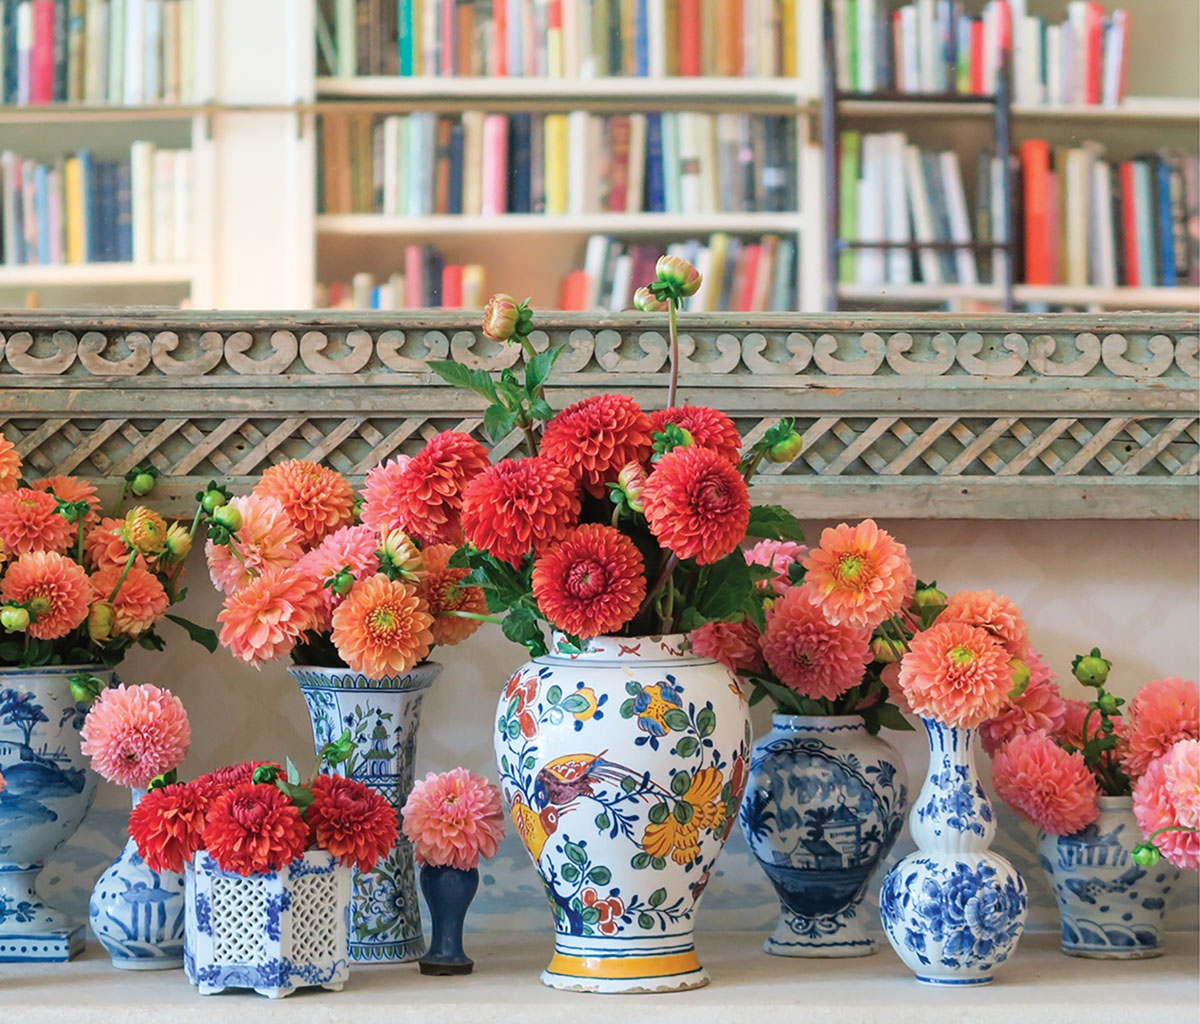 An assortment of blue-and-white chinoiserie vessels filled with dahlia blooms ranging from coral to red